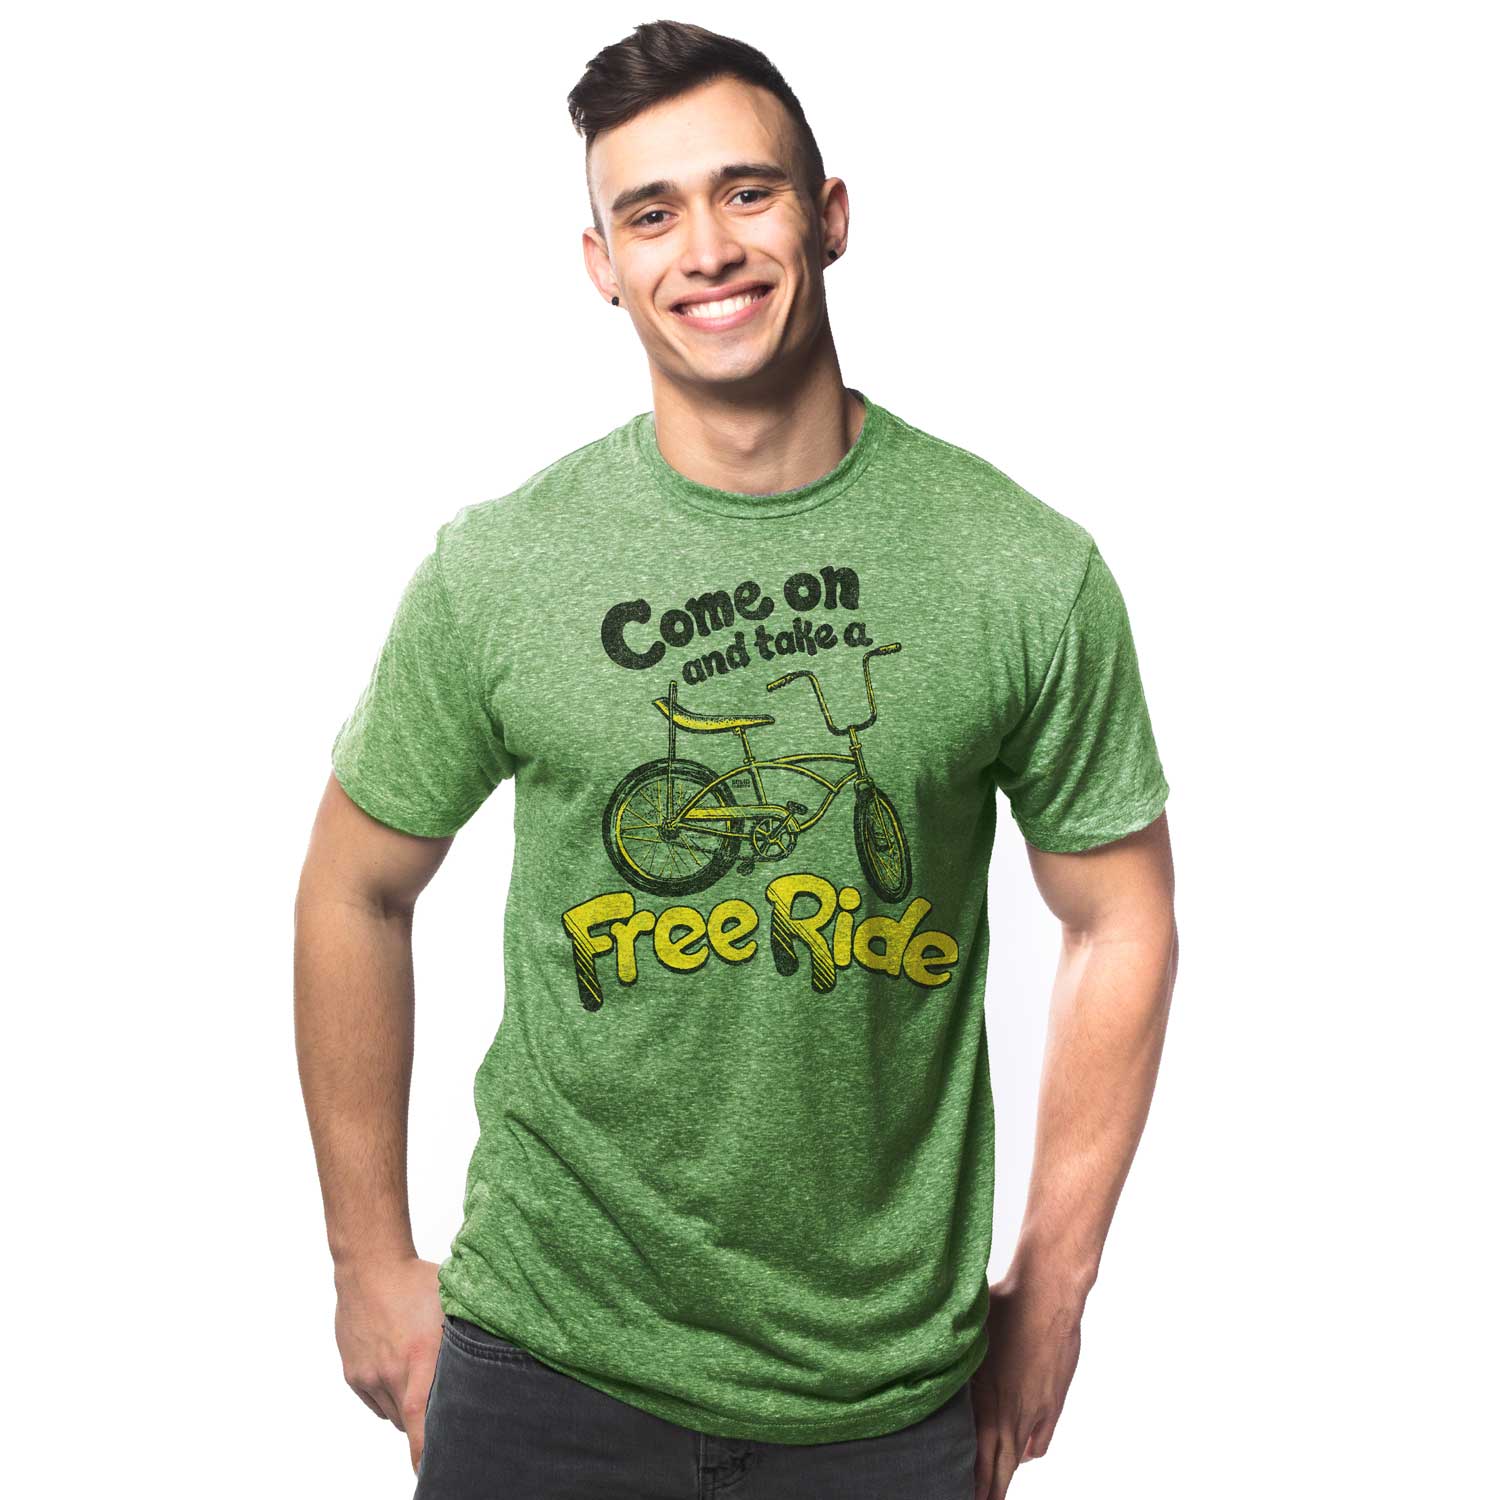 Men's Come On Take a Free Ride Vintage Inspired T-shirt | Retro Bicycle Graphic Tee | Solid Threads